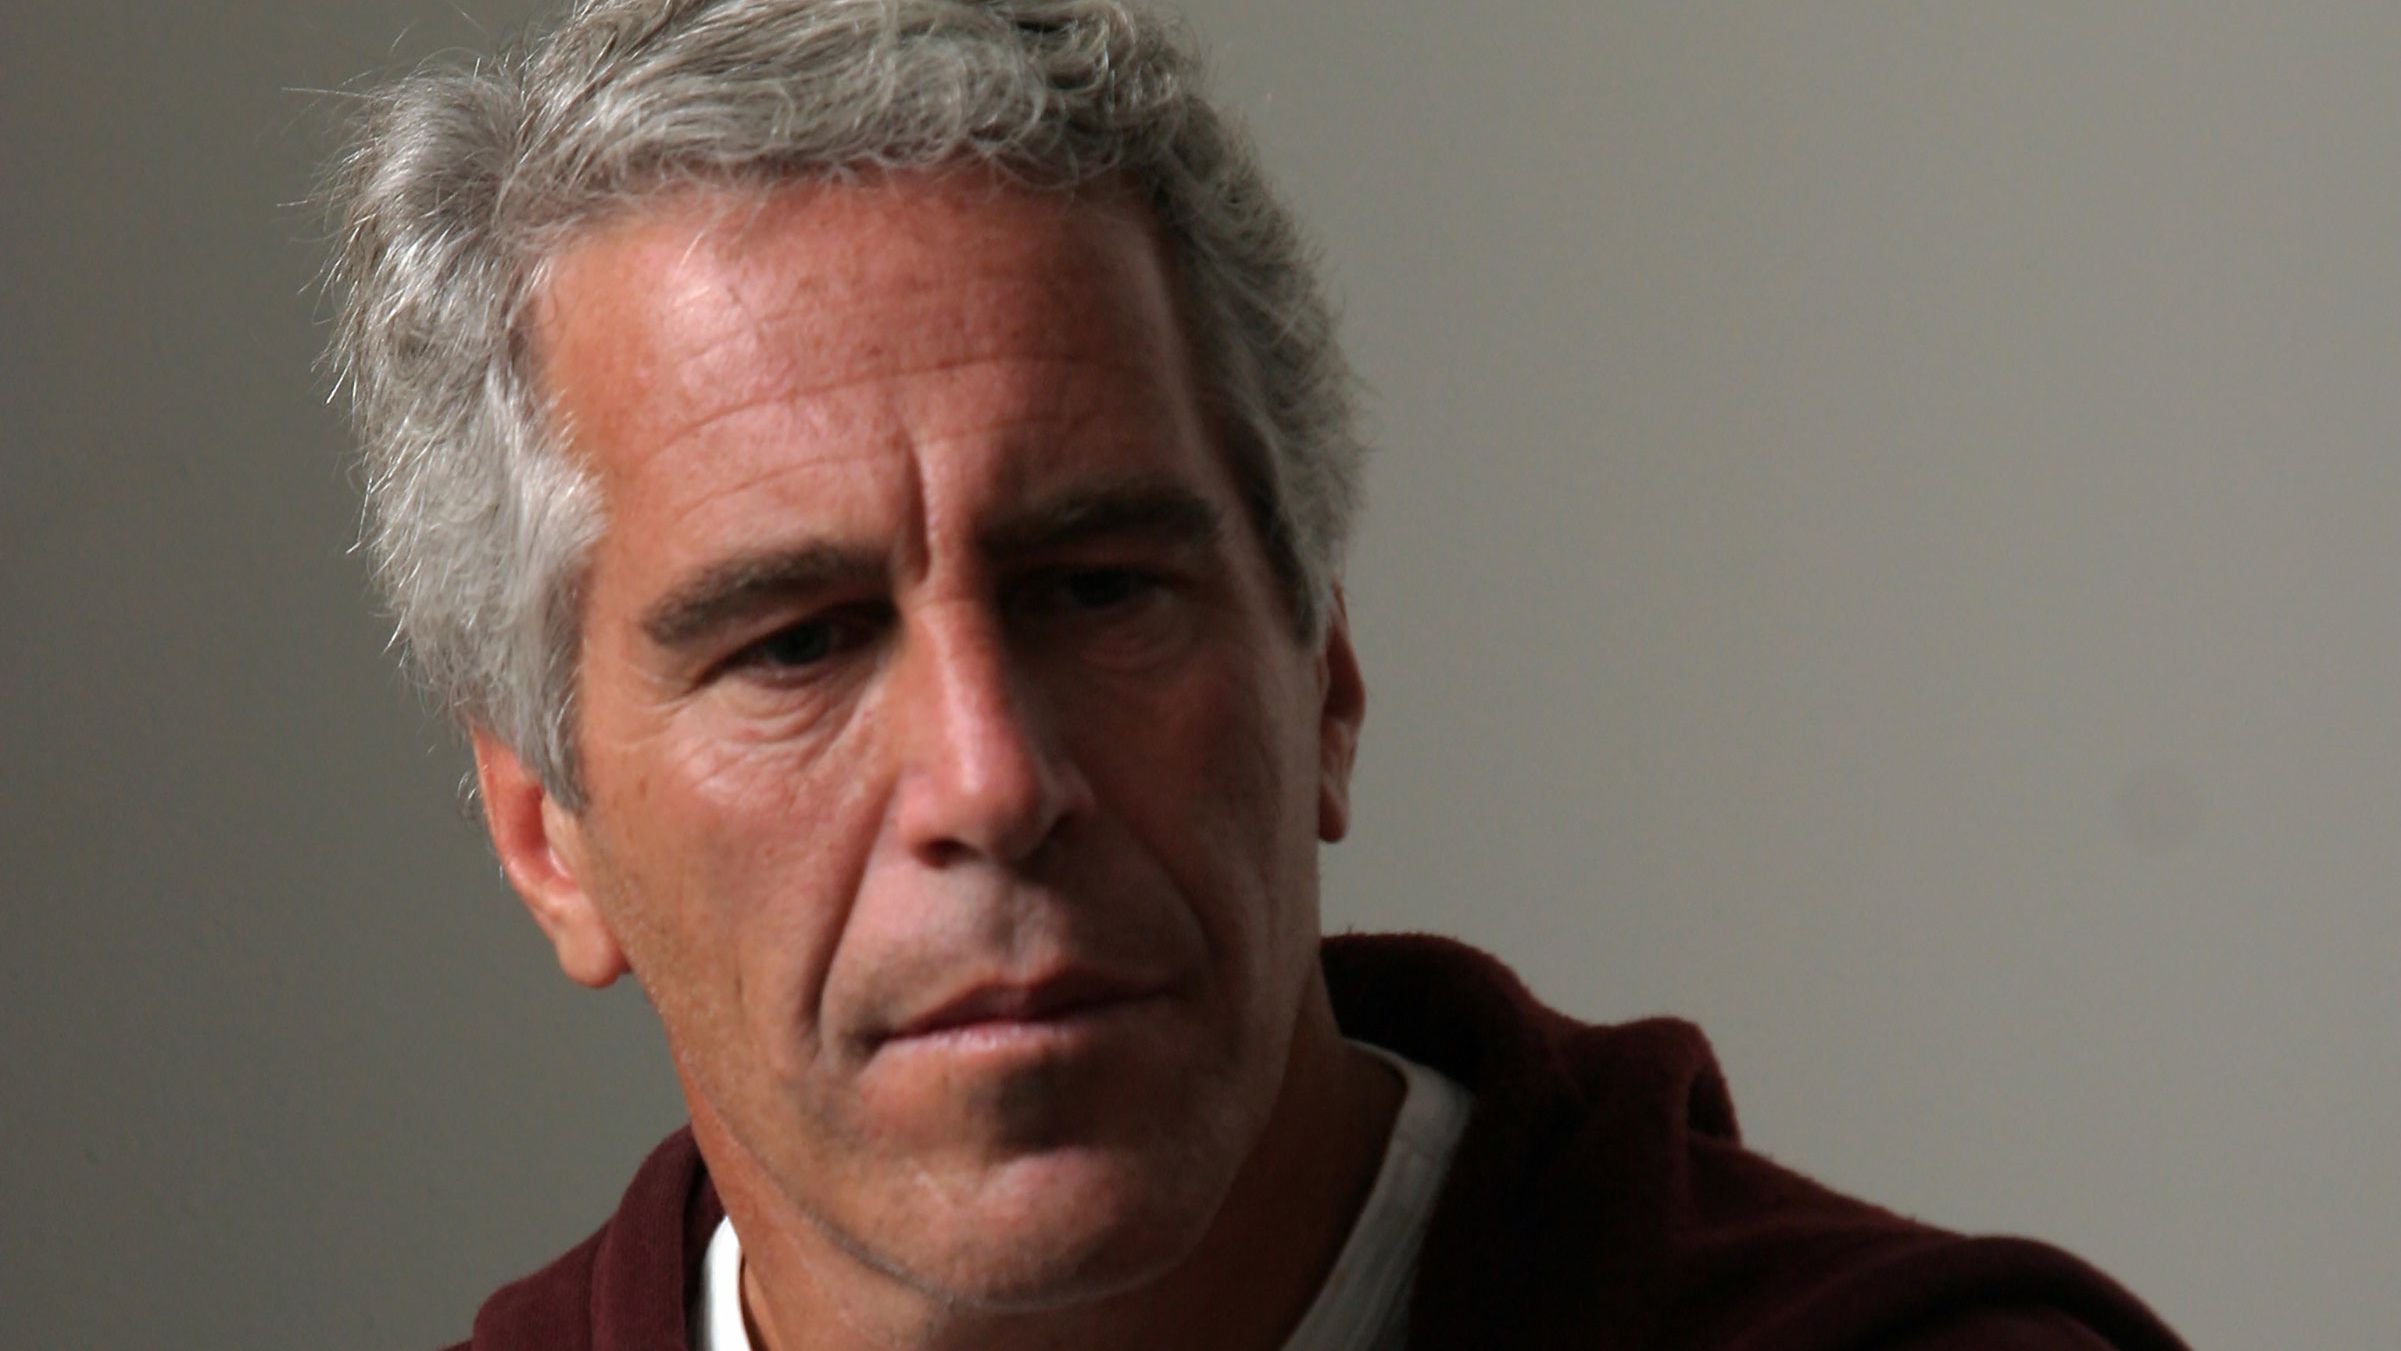 Victims of Jeffrey Epstein Sue FBI Over Failure to Investigate Abuse